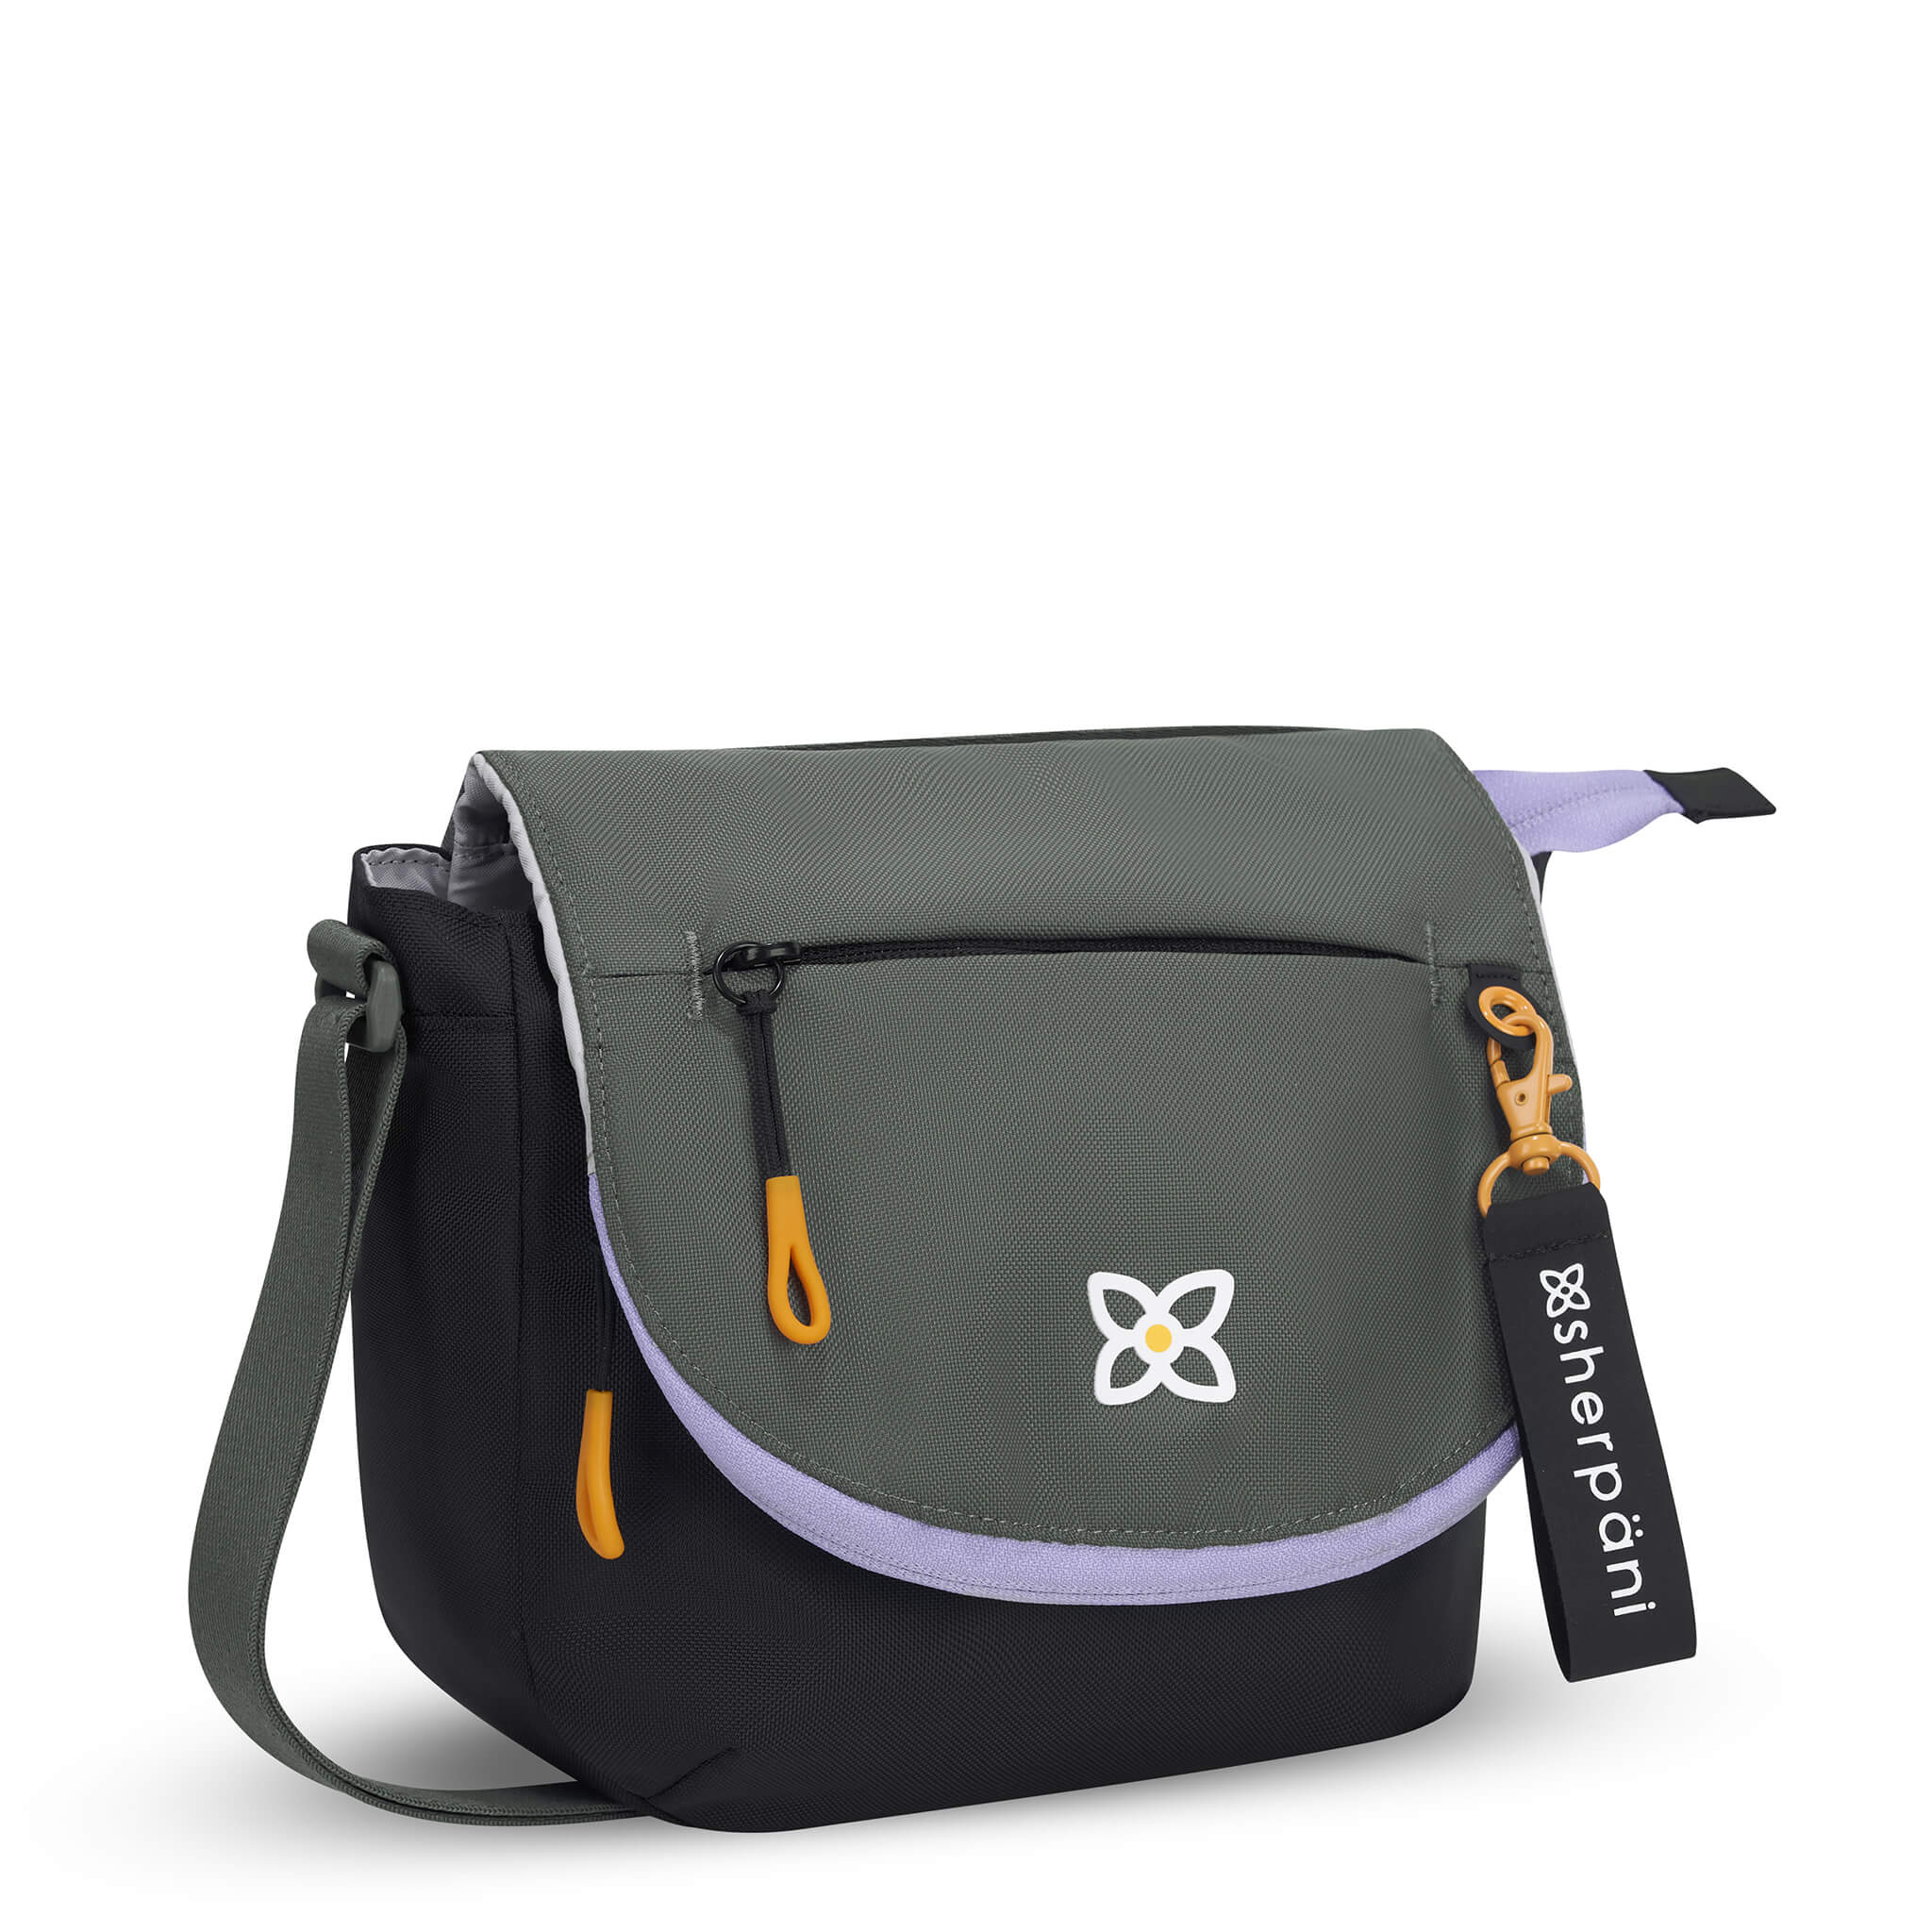 Angled front view of Sherpani messenger satchel bag, the Milli in Juniper. Milli features include an adjustable crossbody strap, front zipper pocket, brimmed zipper pocket, detachable keychain, magnetic closure, RFID security and multiple internal pockets for organization. The Juniper color is two-toned in black and gray with accents in yellow and purple. 